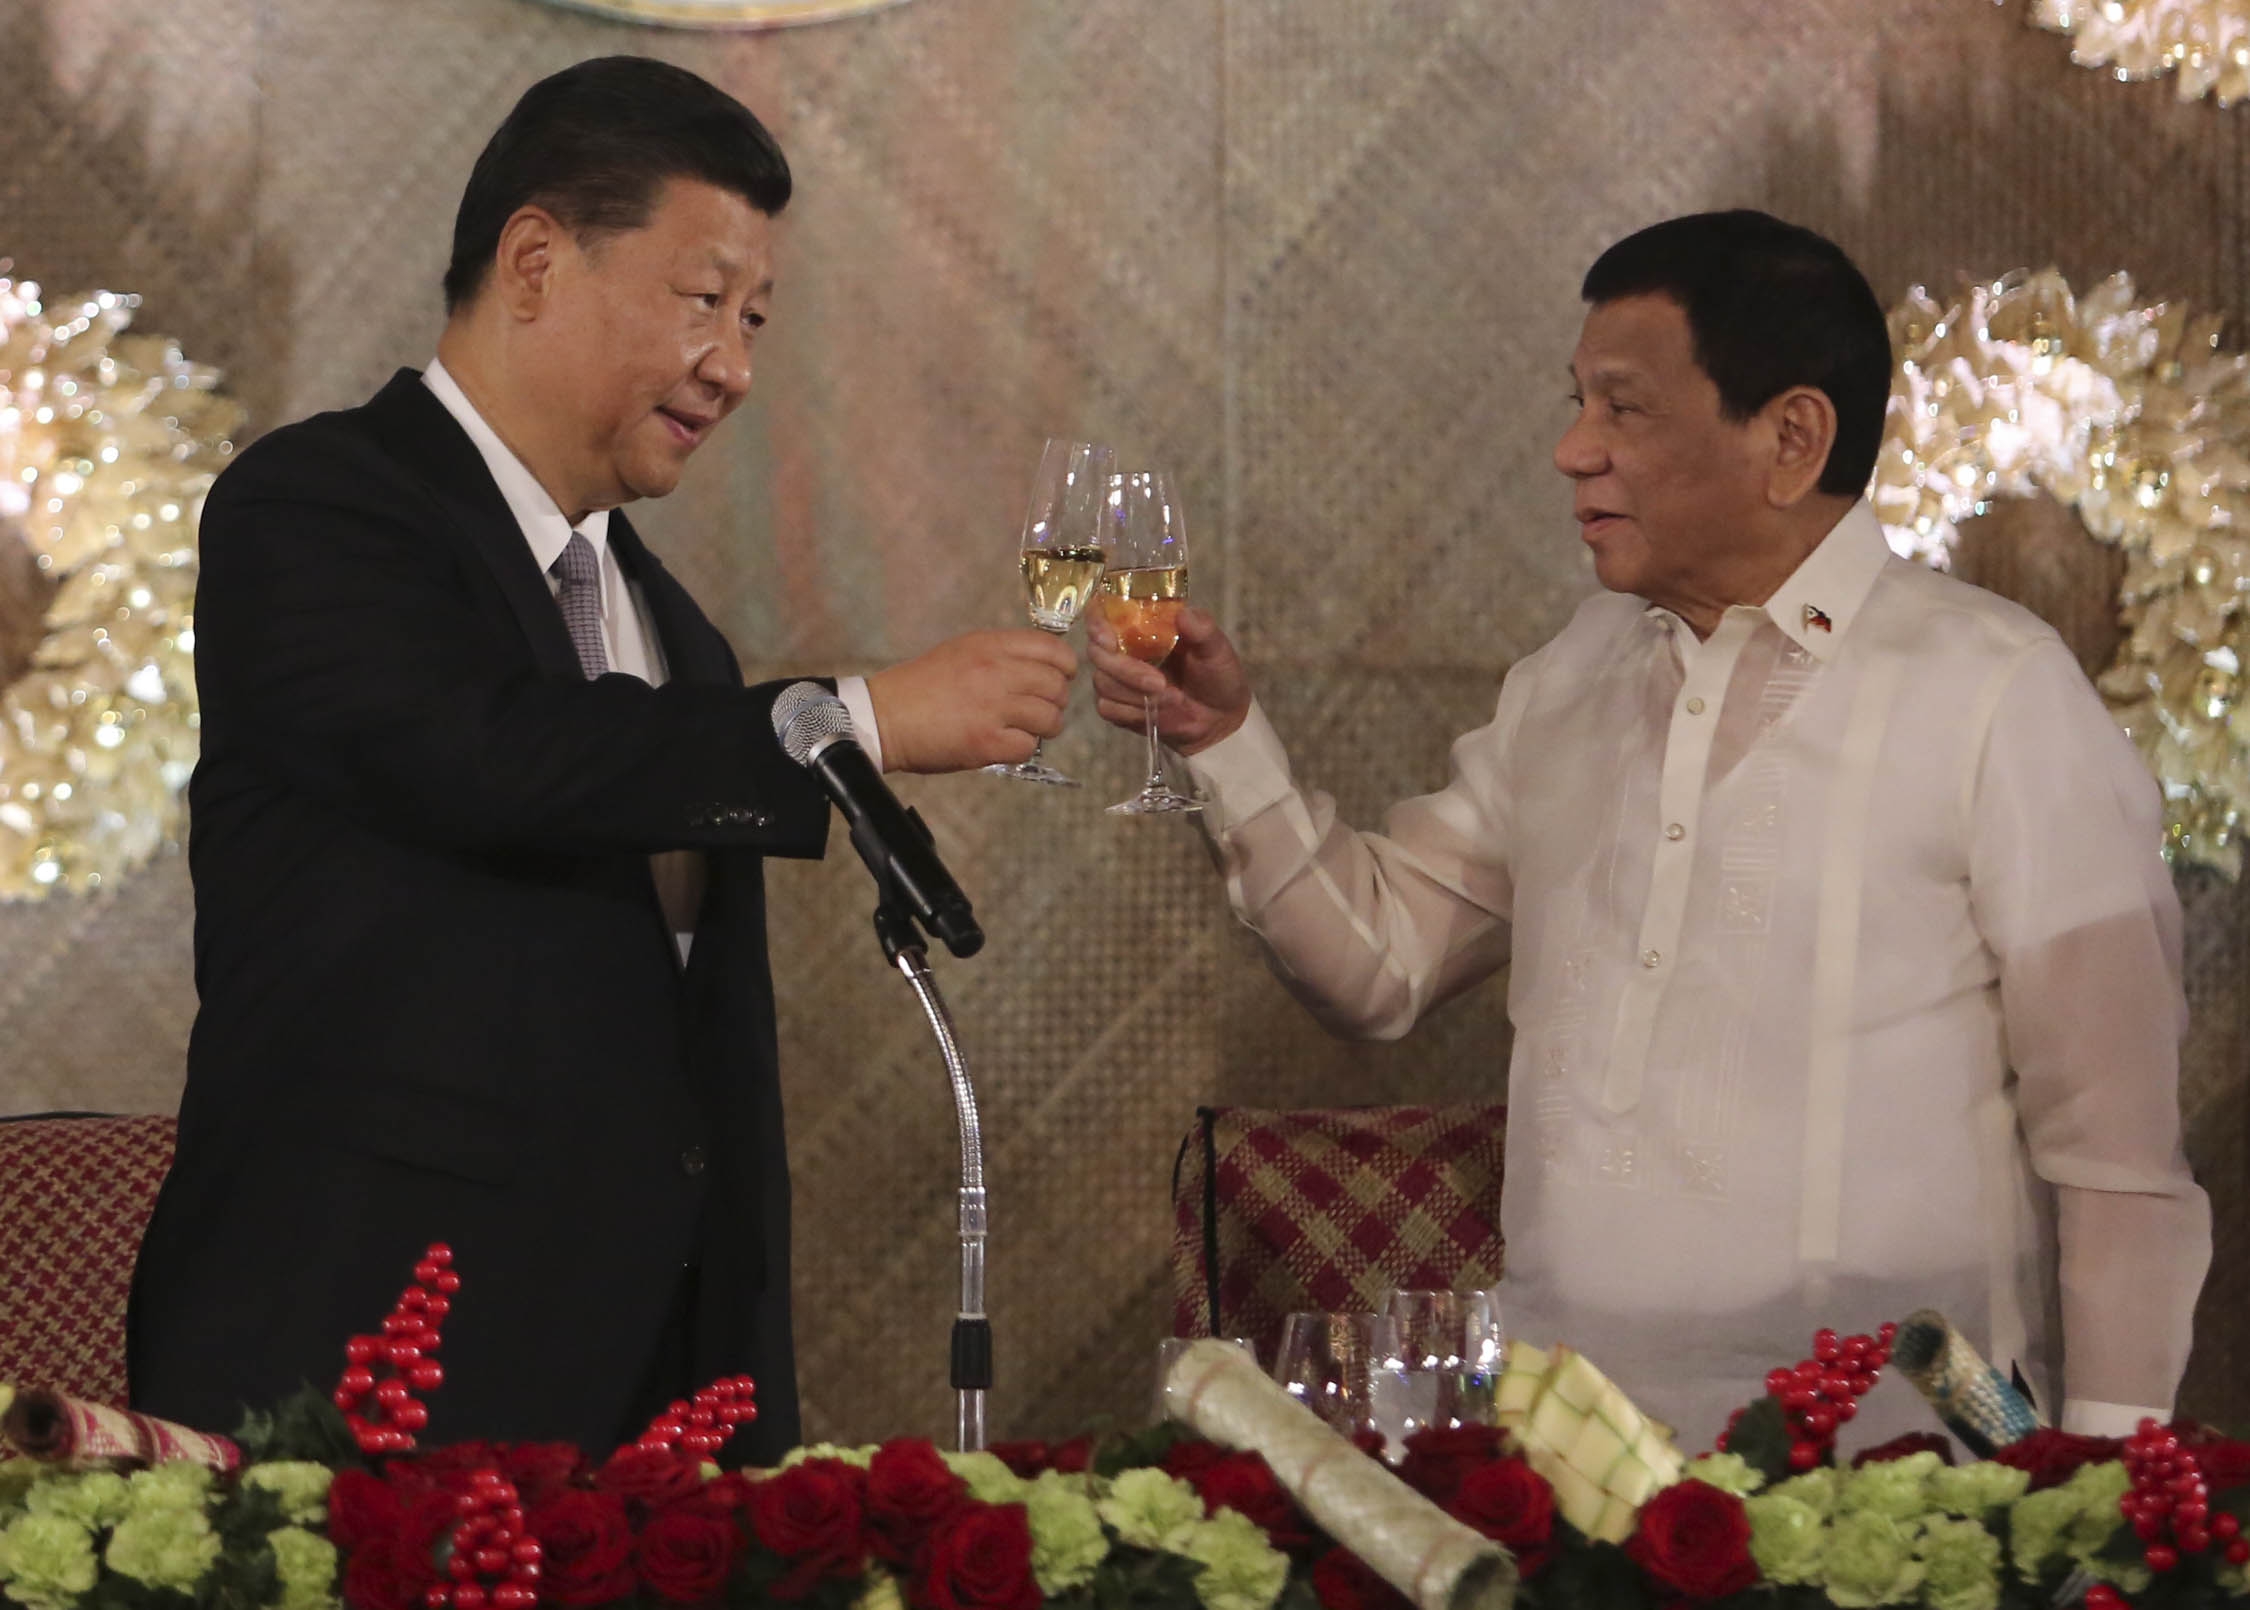 Duterte 'privately' dealing with China invasion in West PH Sea – Palace